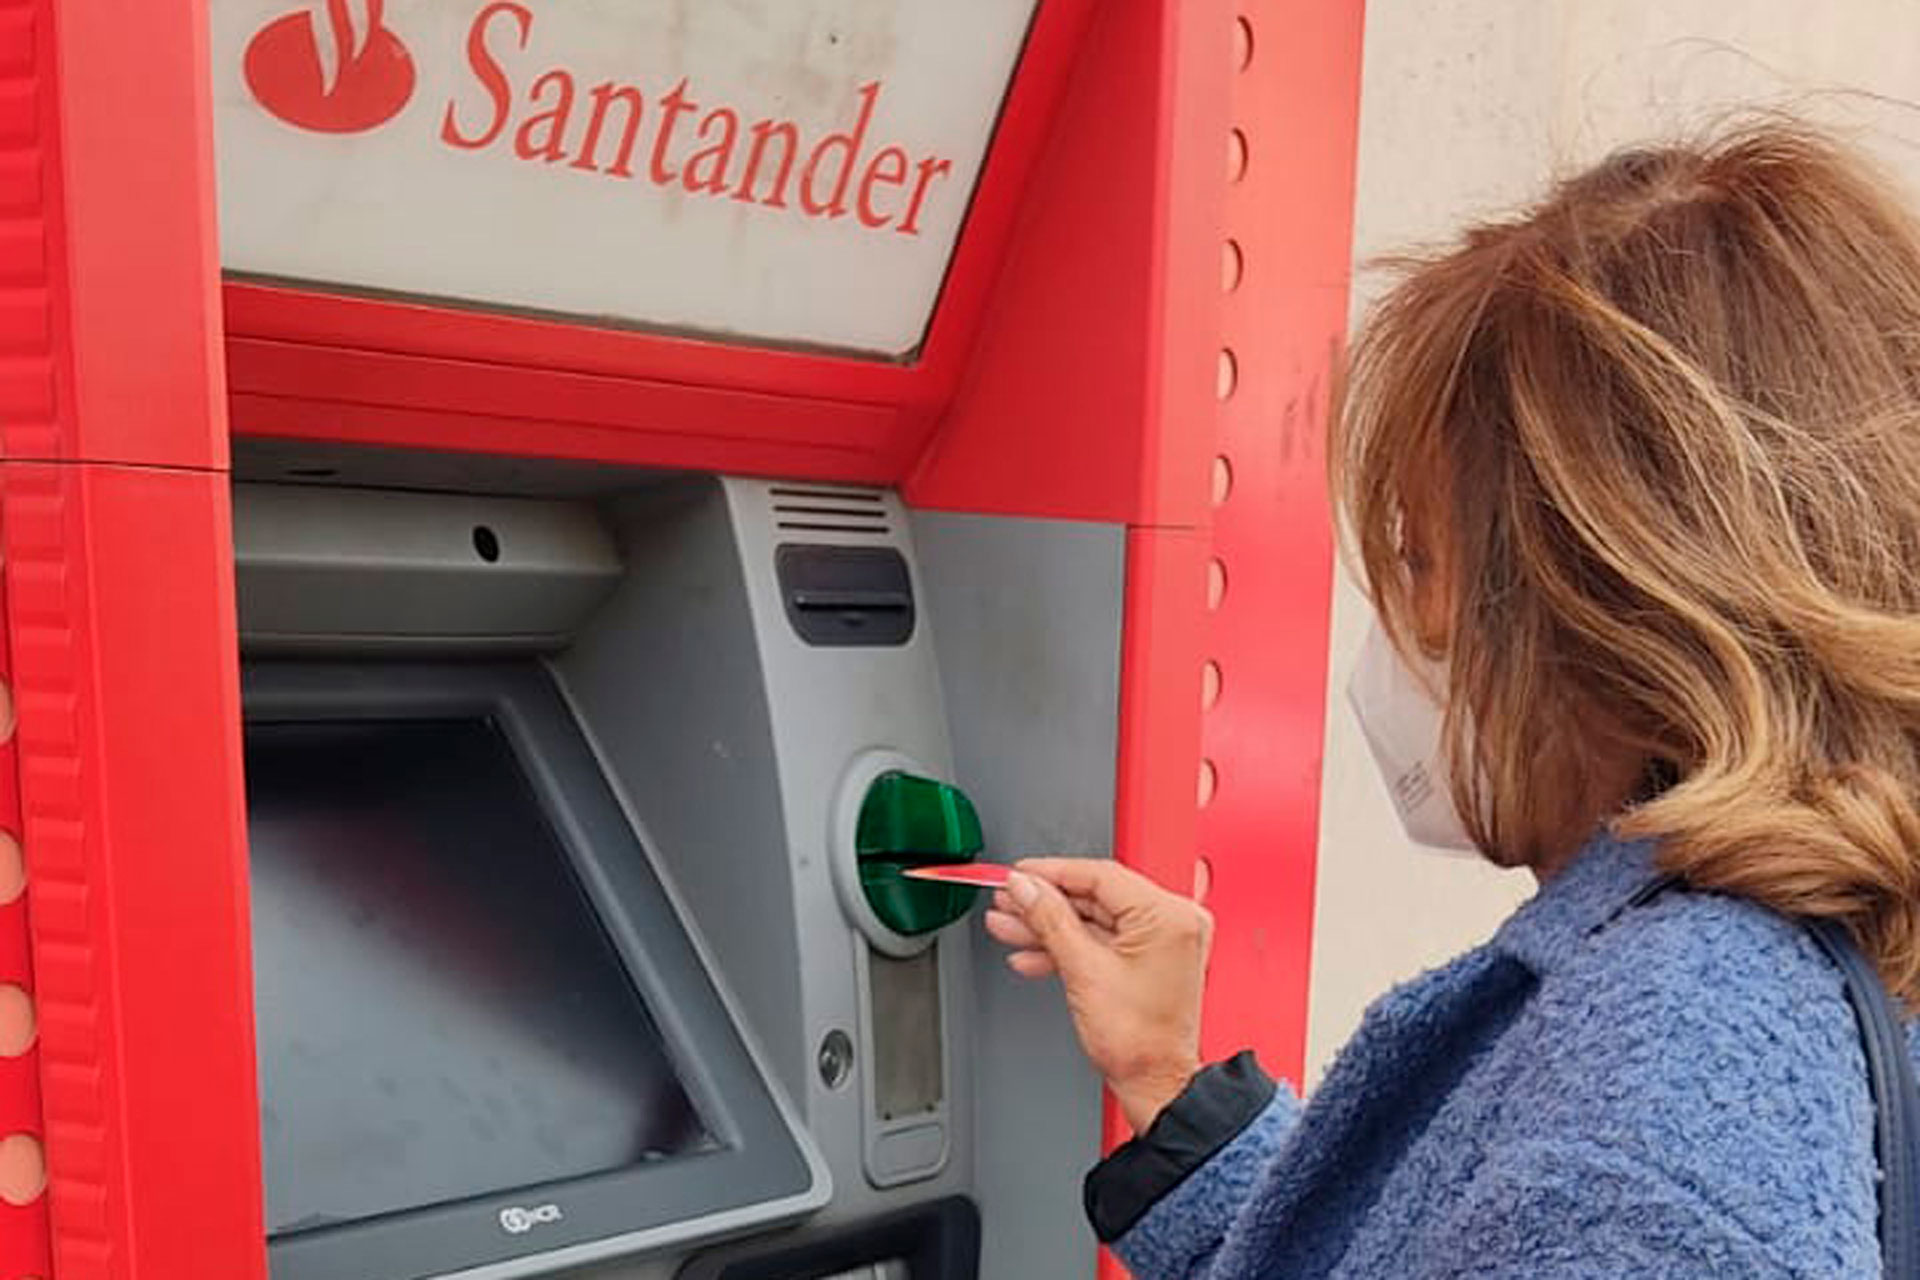 Banco Santander raises financial inclusion target to 15 million people by 2025